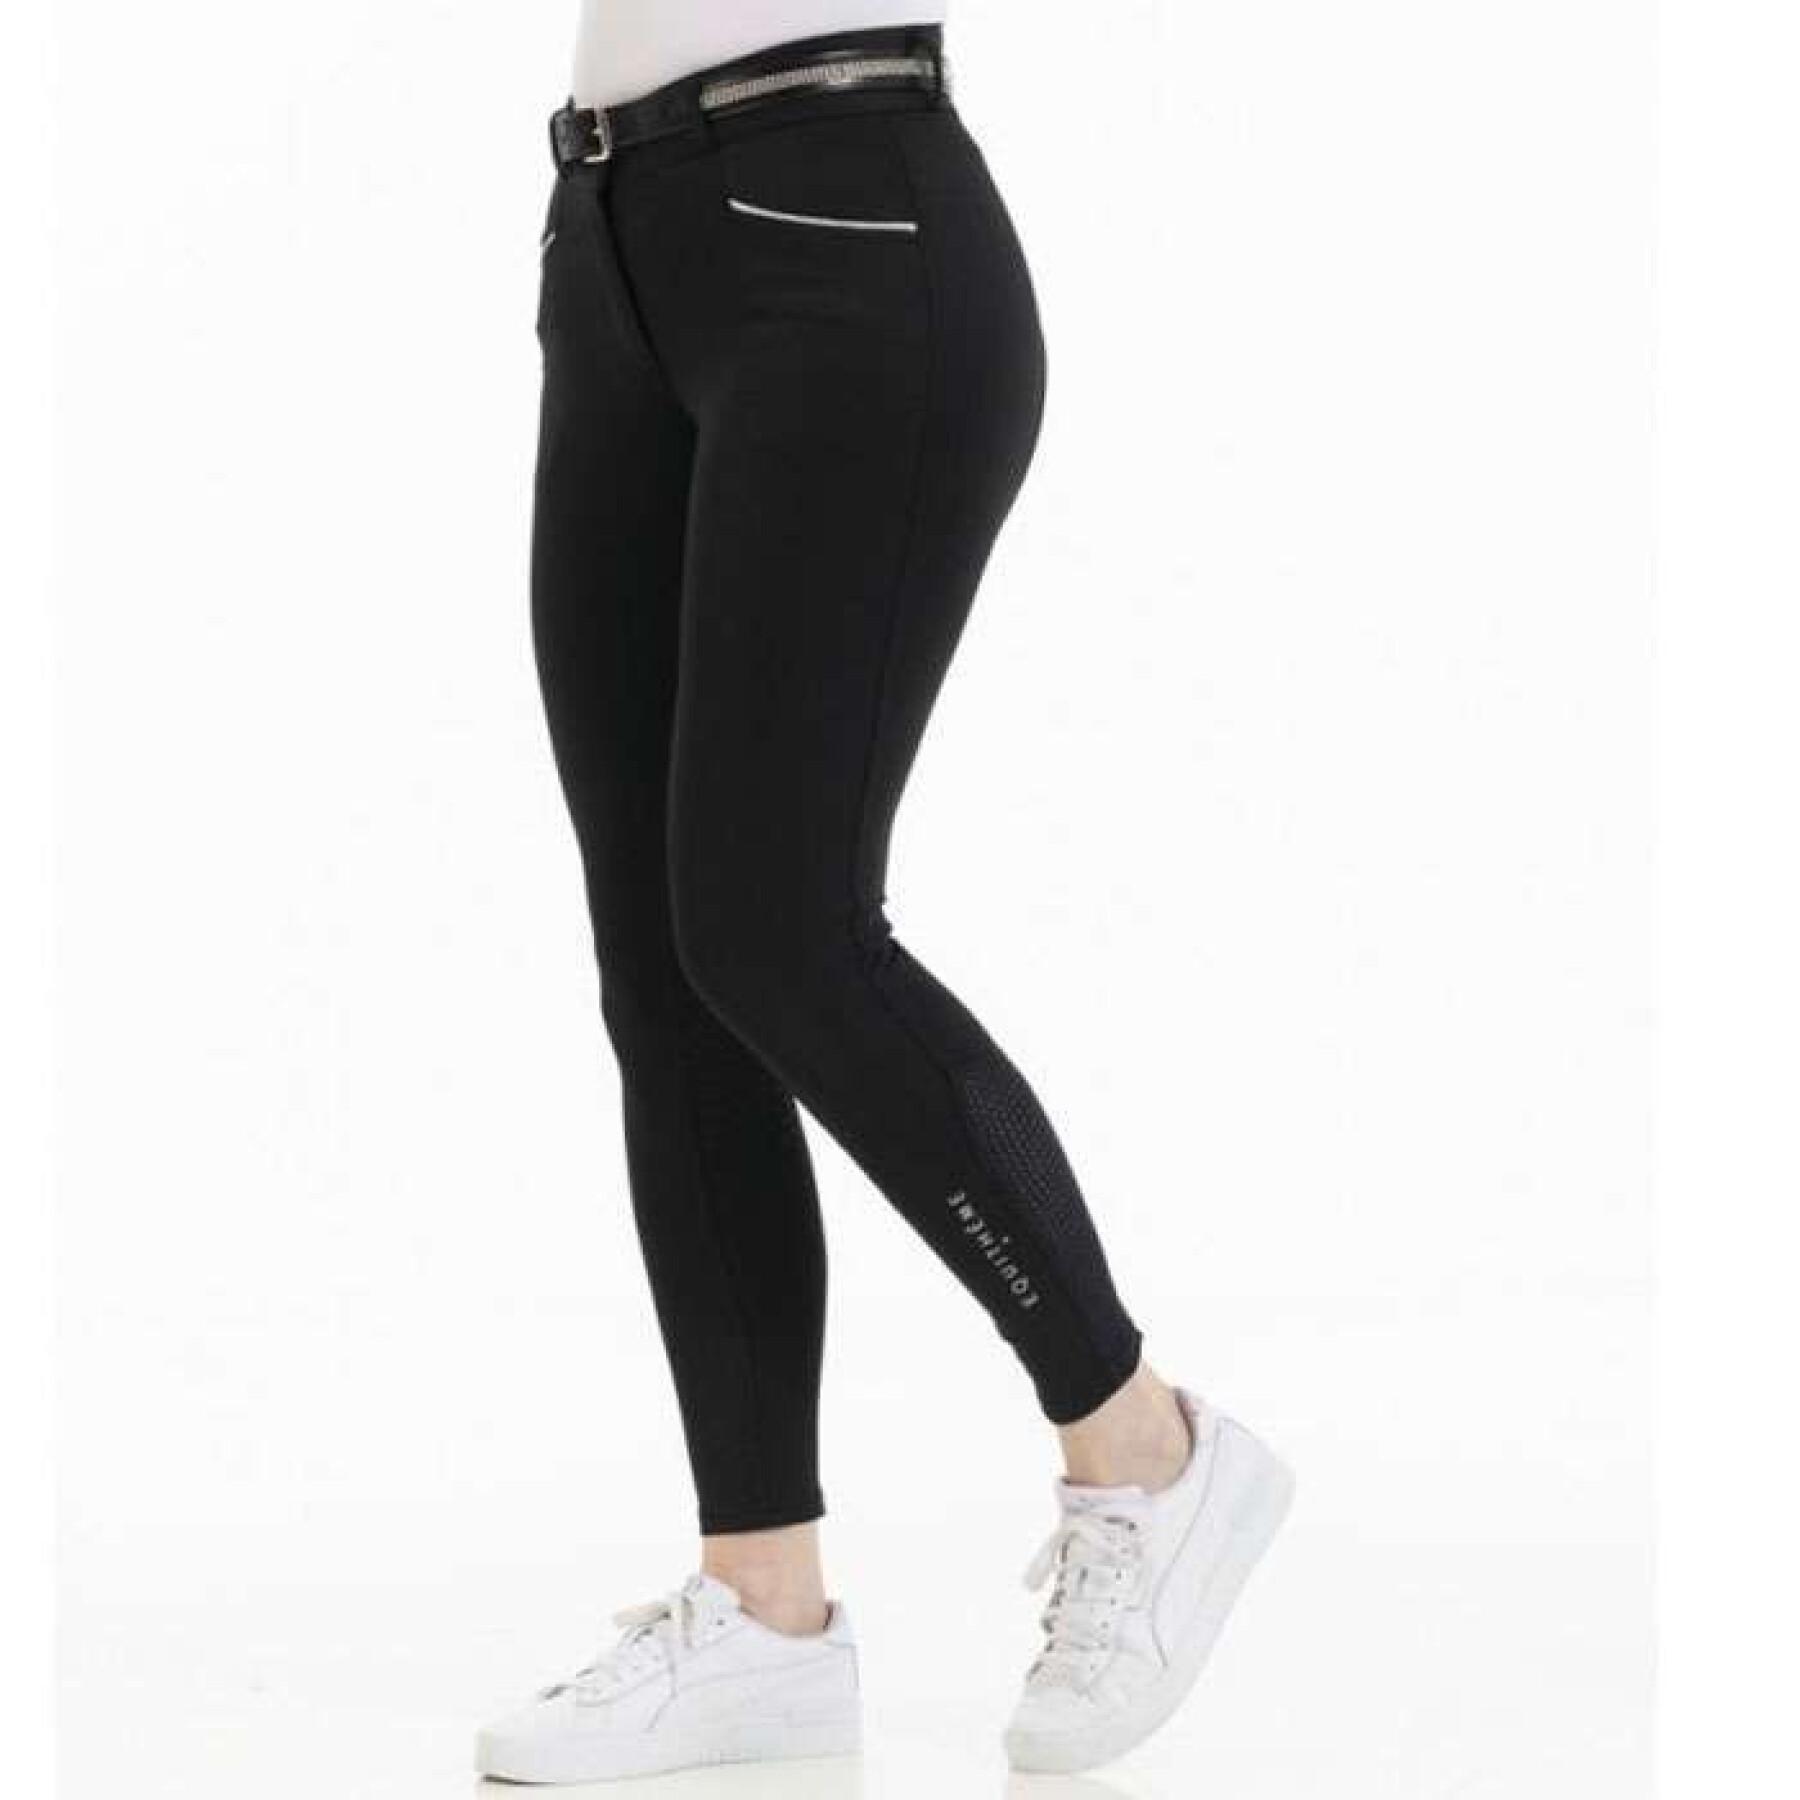 Full grip riding pants for women Equithème Claudine